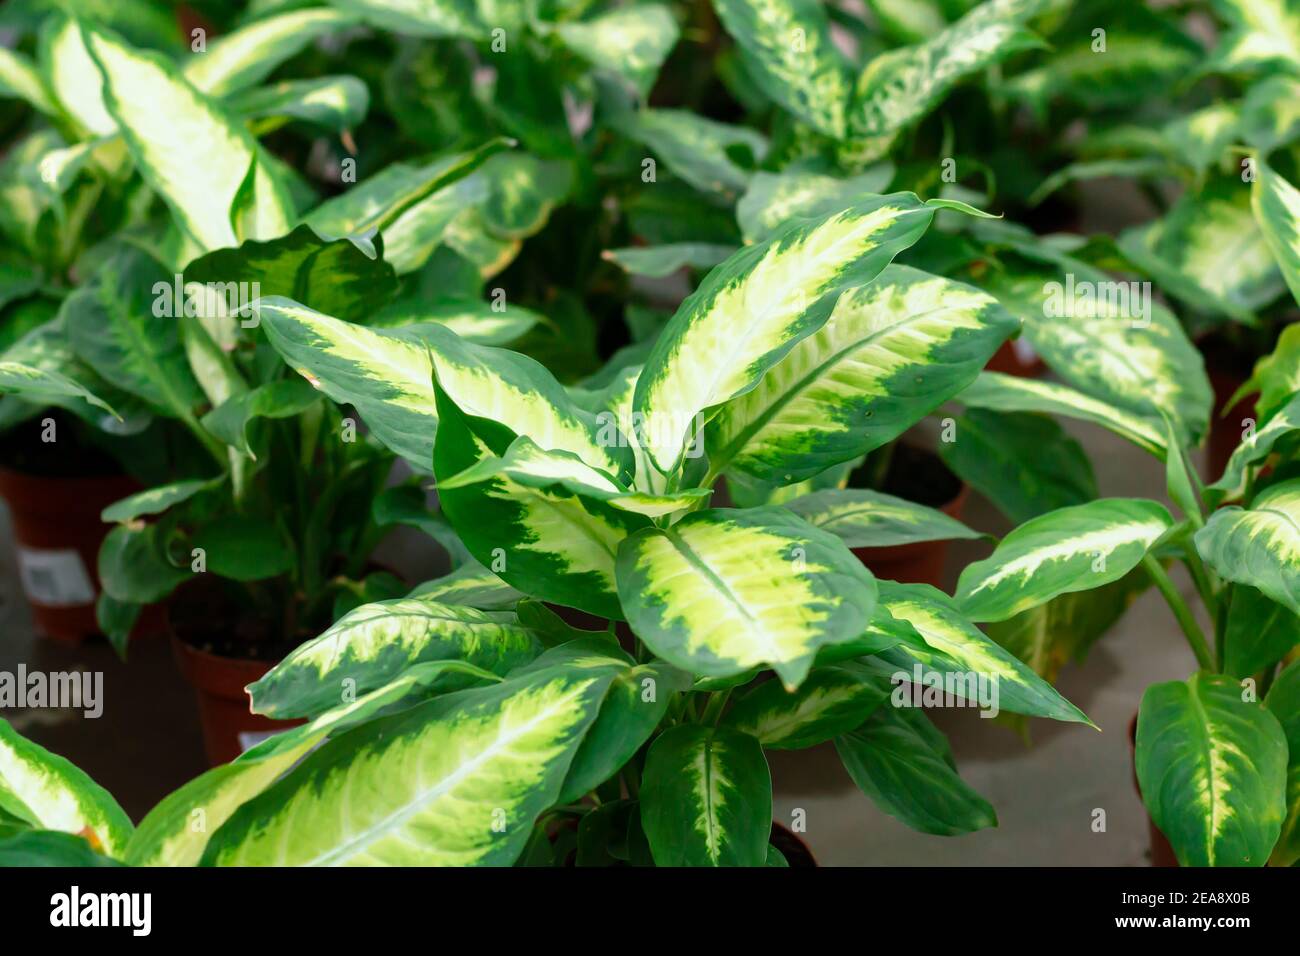 Green potted plants in greenhouse. Dieffenbachia houseplant on sale concept Stock Photo